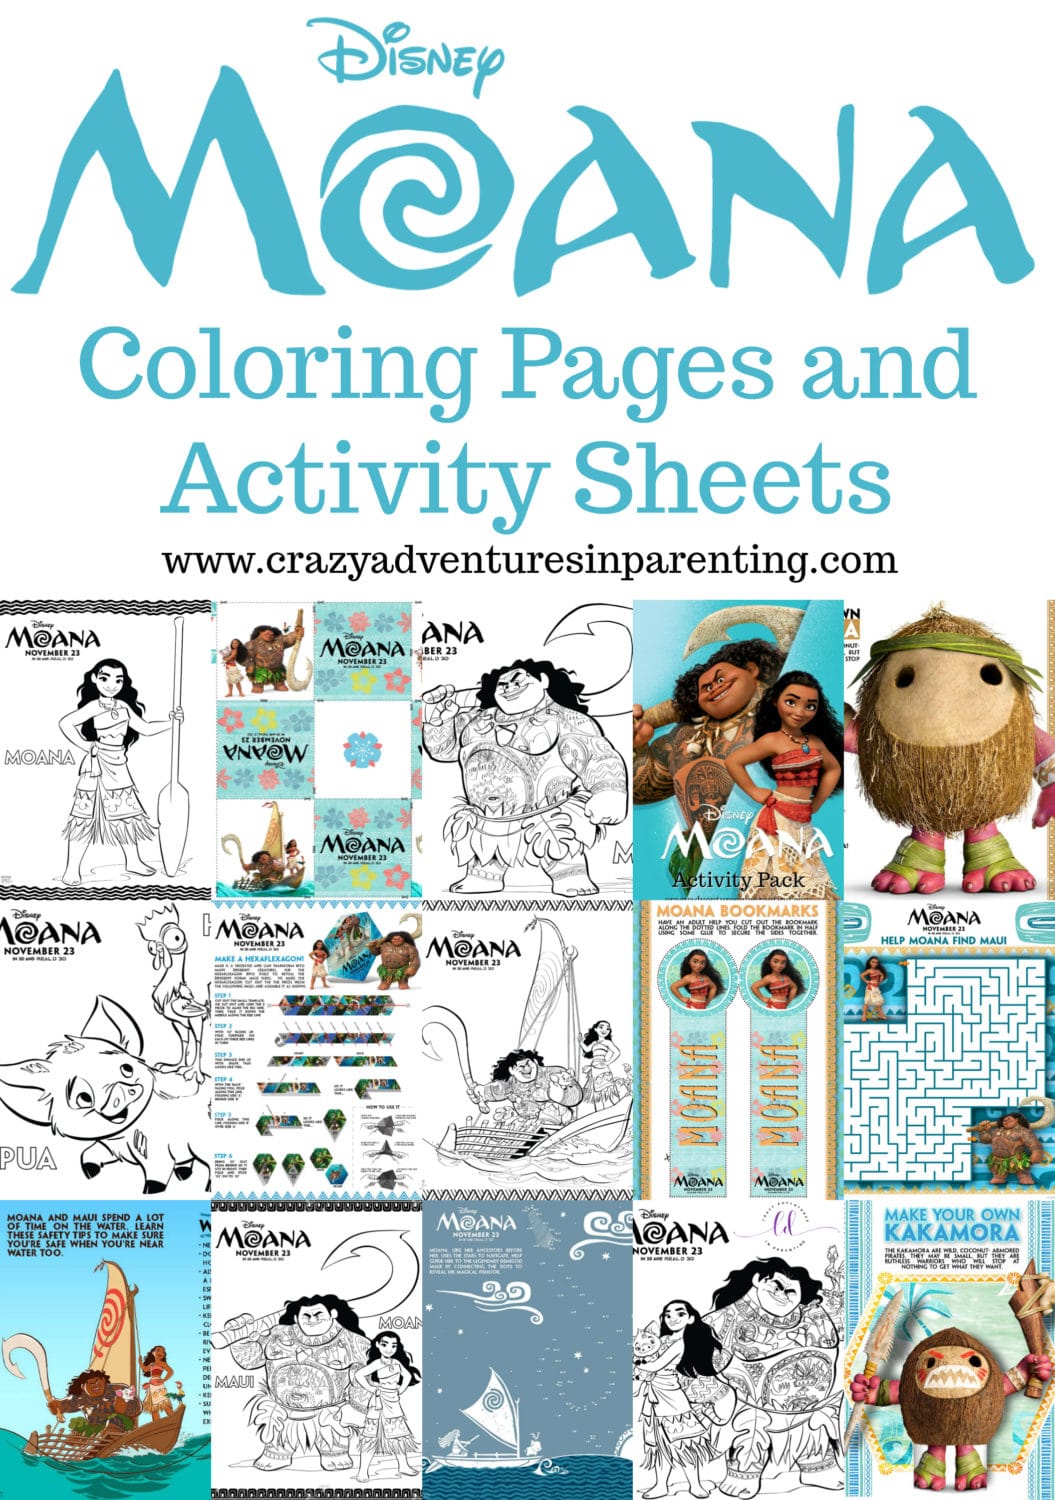 Moana Coloring Pages and Activity Sheets for Kids